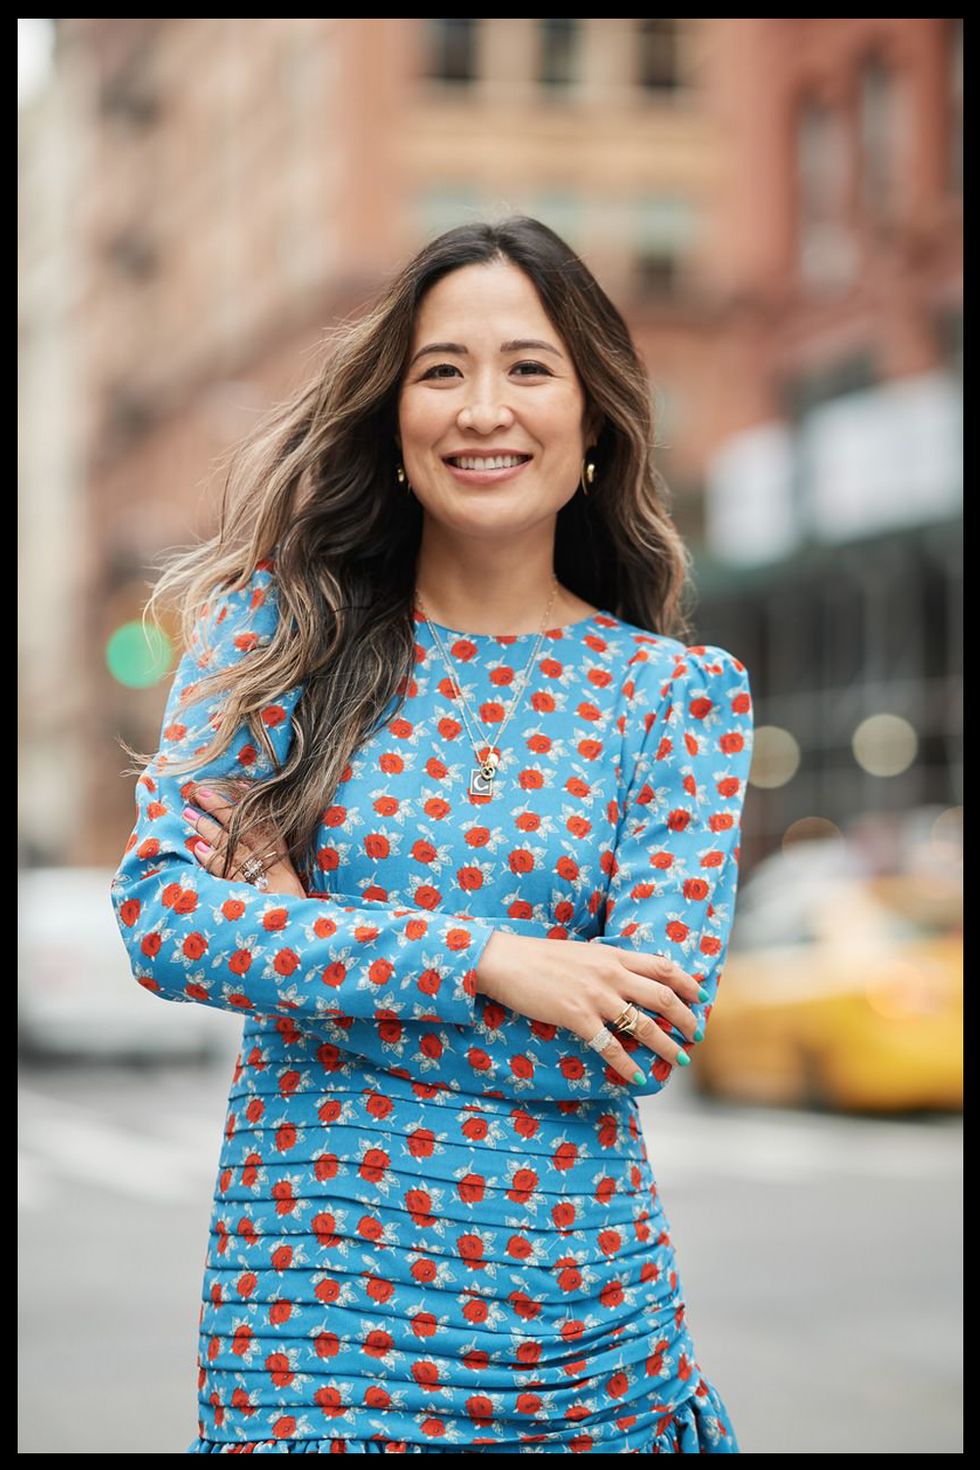 shopbop's fashion buying director wears a blue dress in new york city